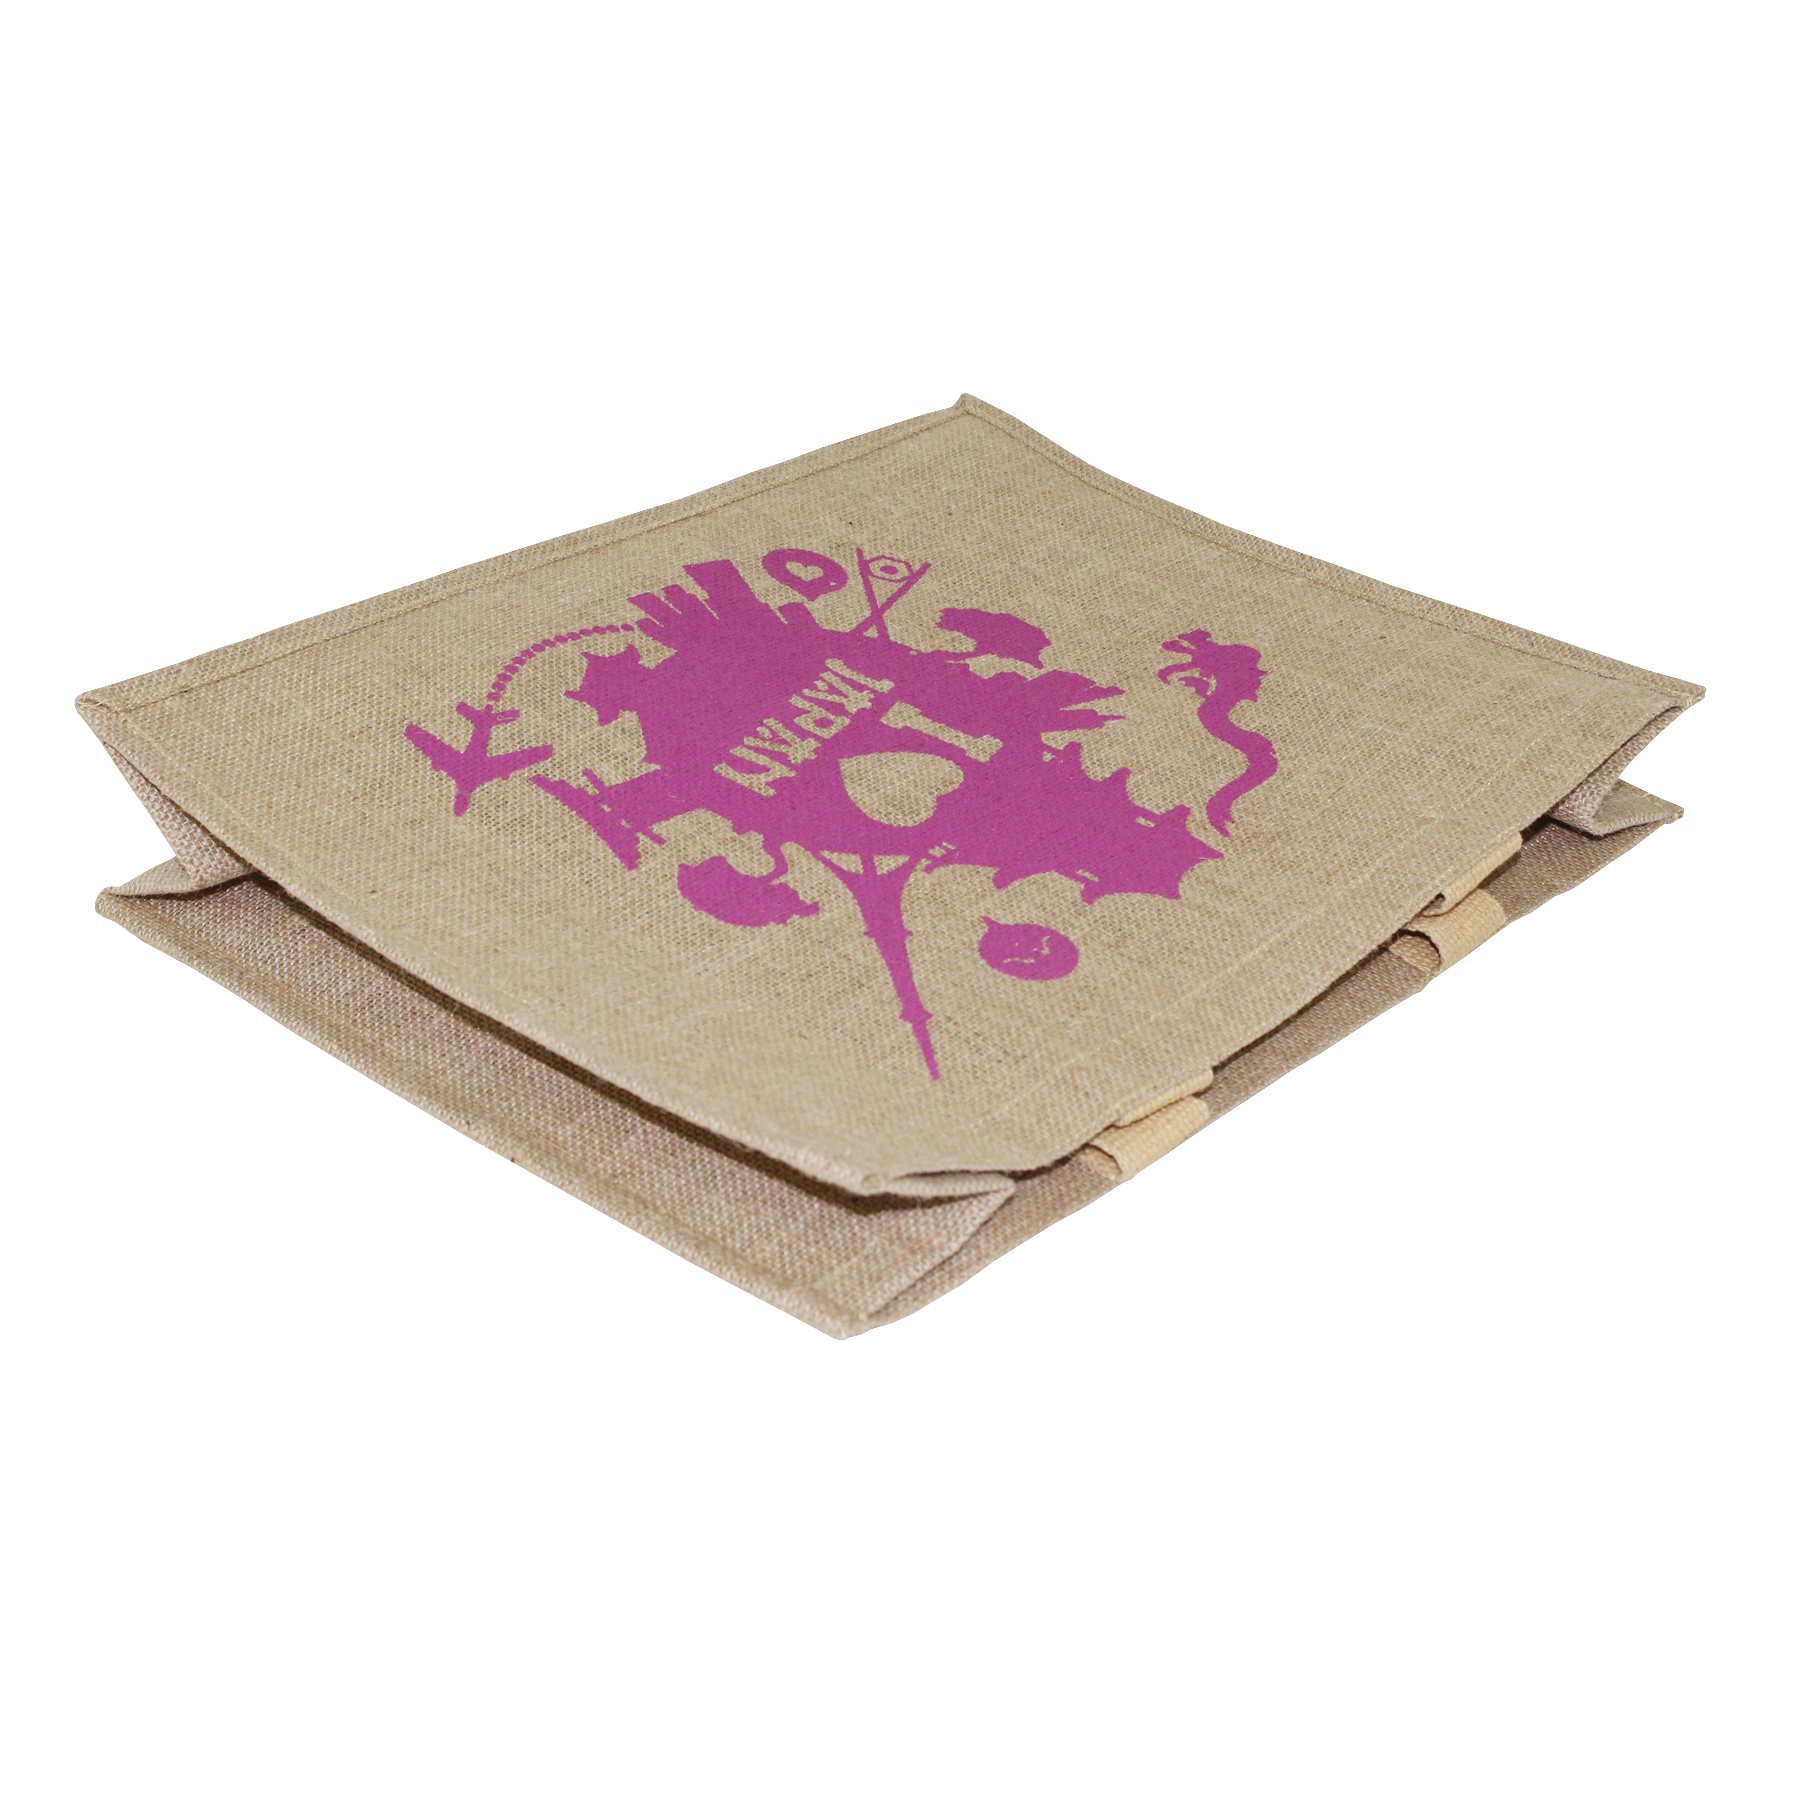 PP Laminated Jute Shopping Bag With Web Handle